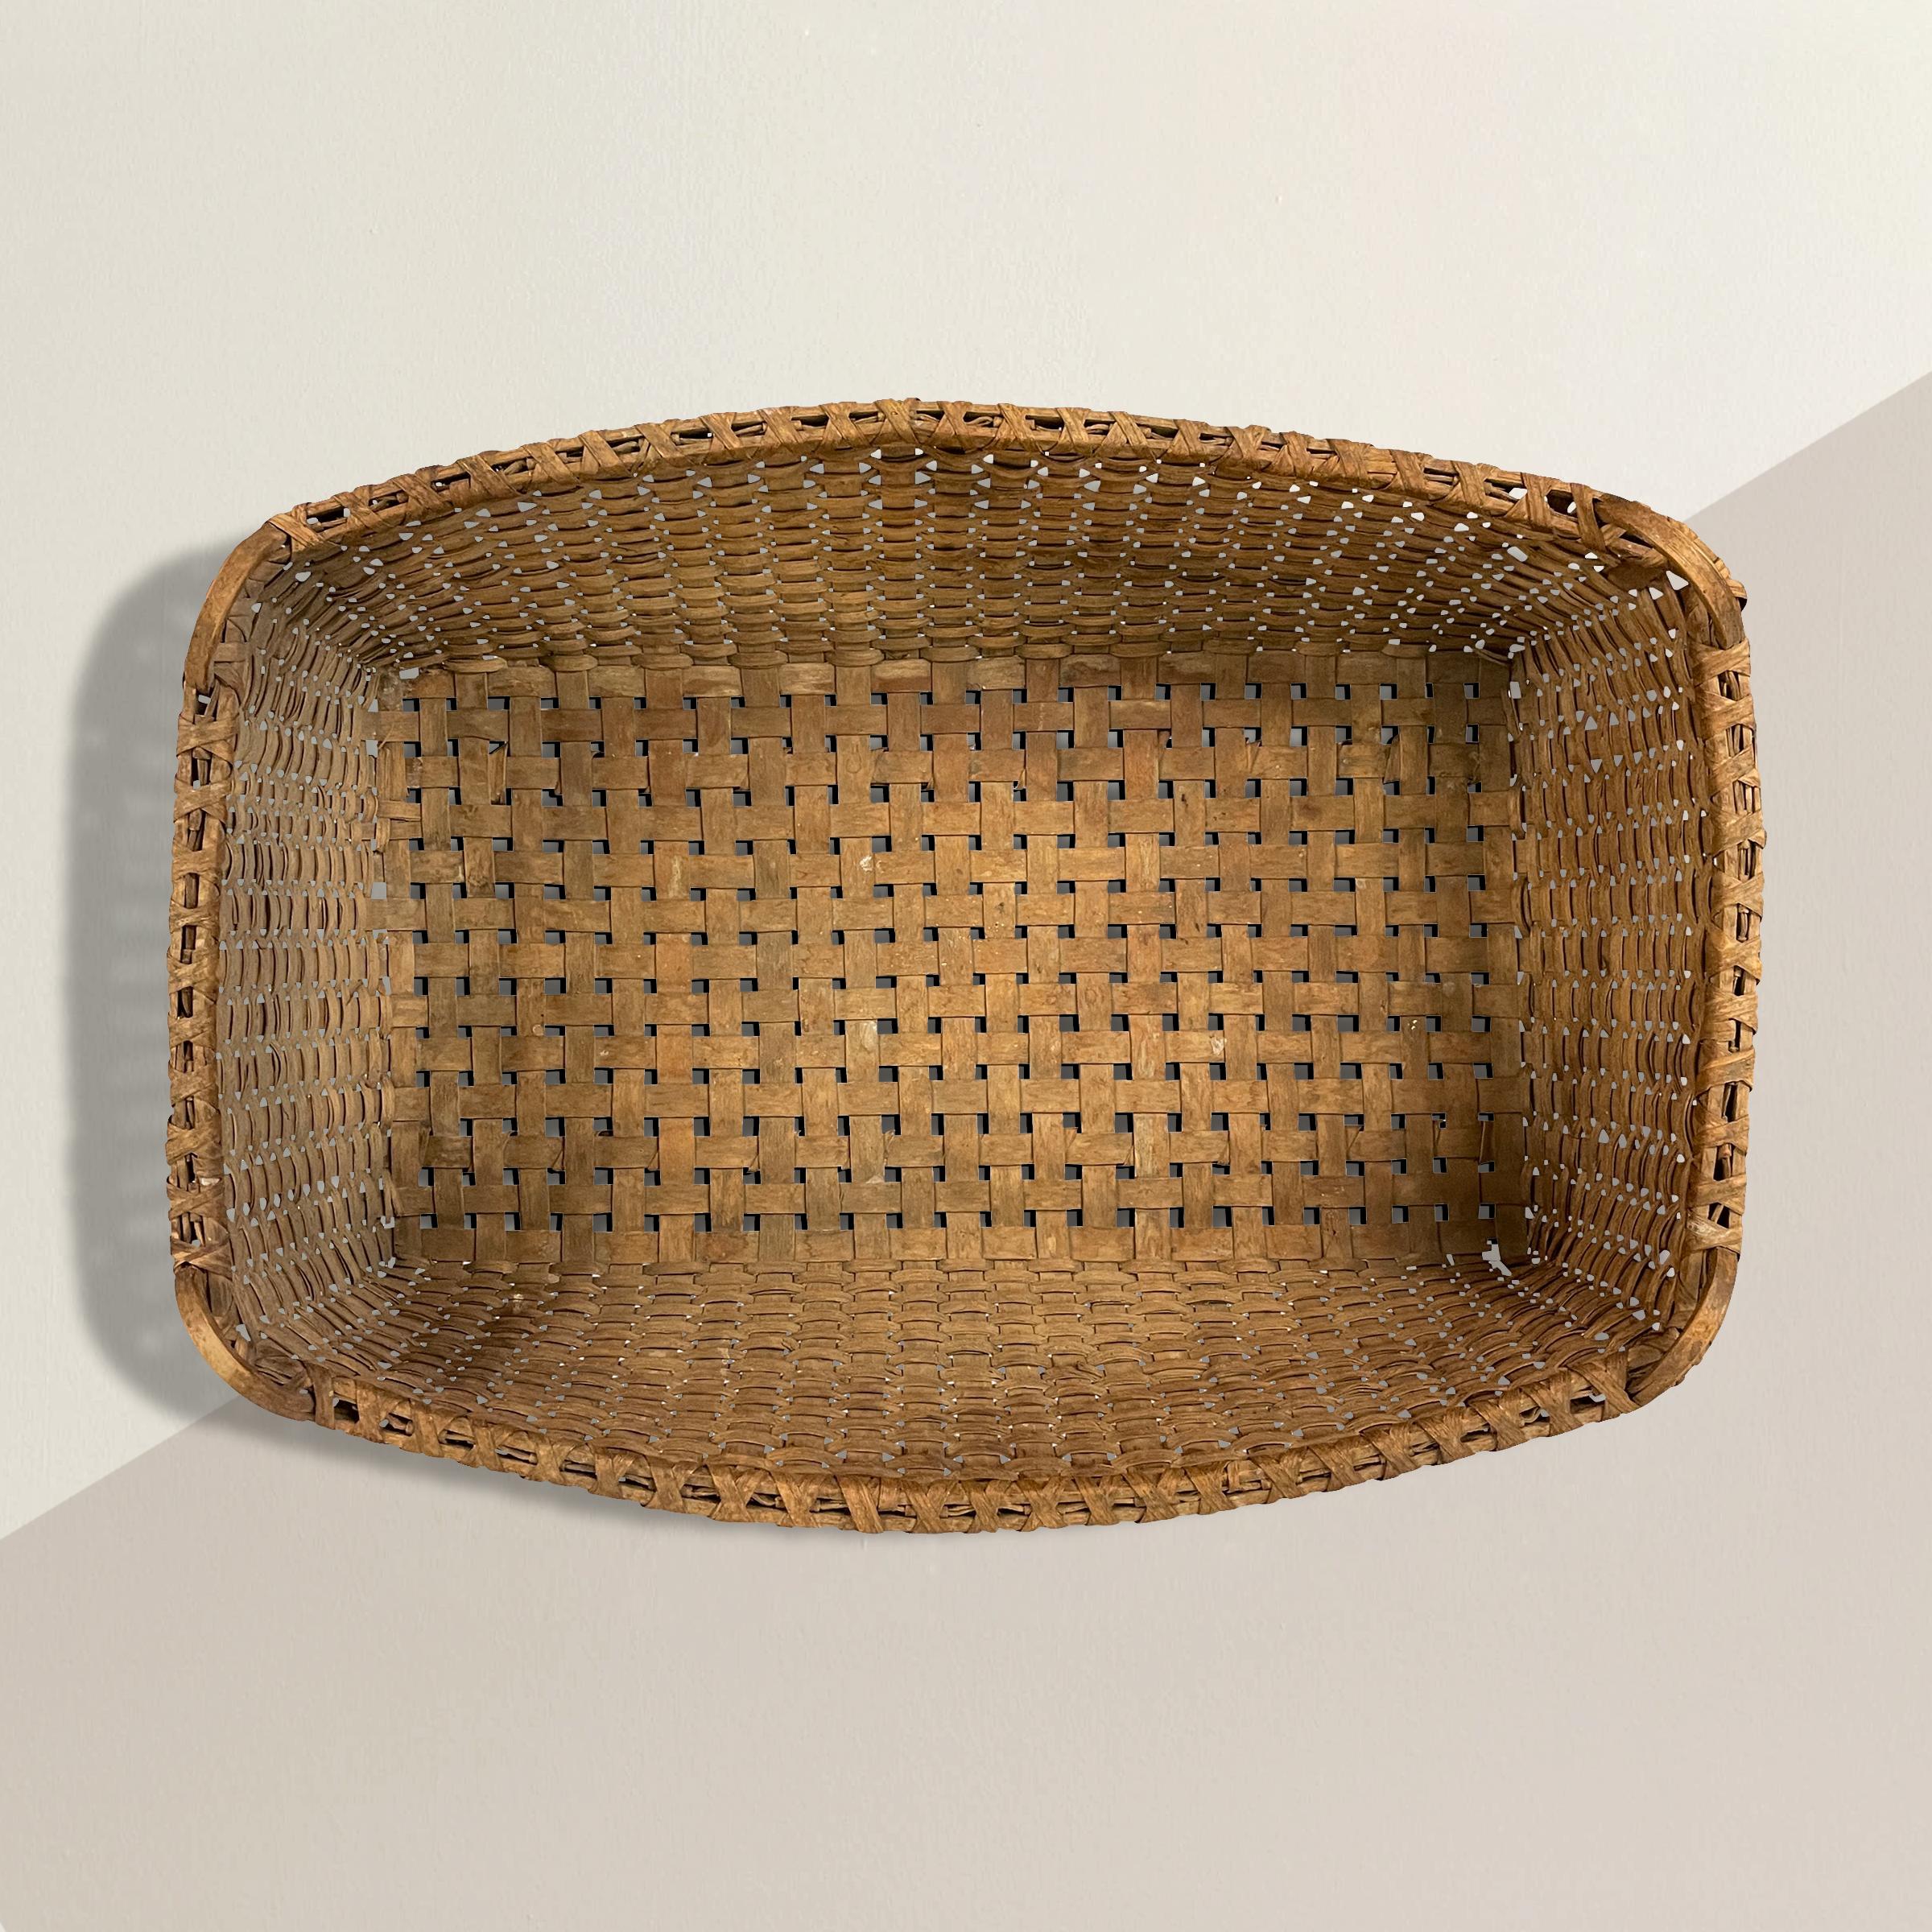 An incredible and rare 19th century American hand-woven oak-splint tobacco leaf basket with a bent-wood handle on each corner, wood runners on the bottom, and the most wonderful patina only time can bestow. Perfect for holding pillows and blankets